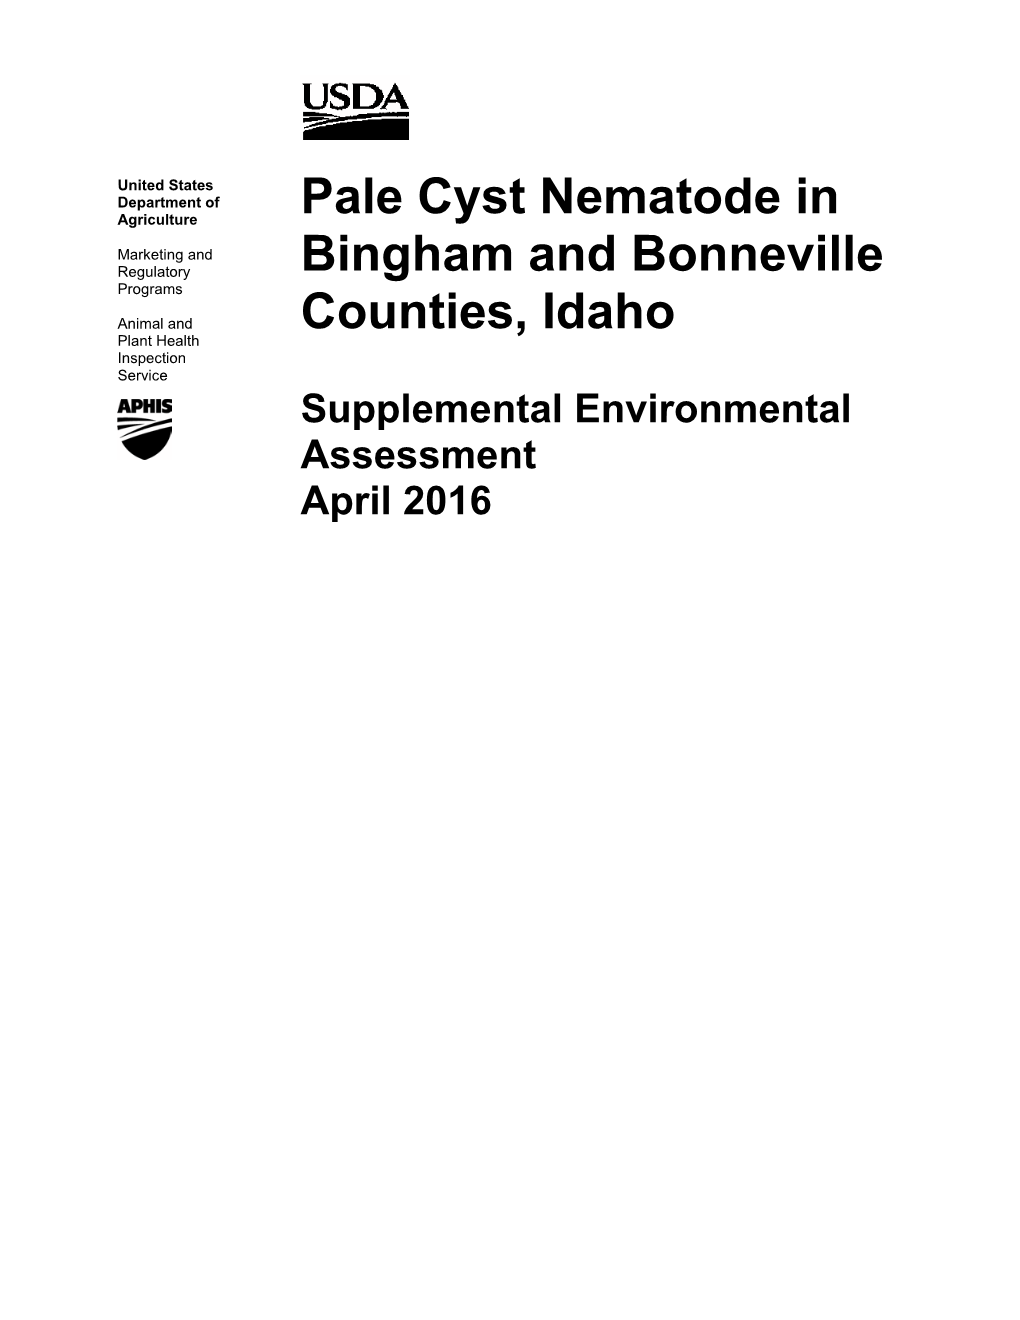 Pale Cyst Nematode in Bingham and Bonneville Counties, Idaho